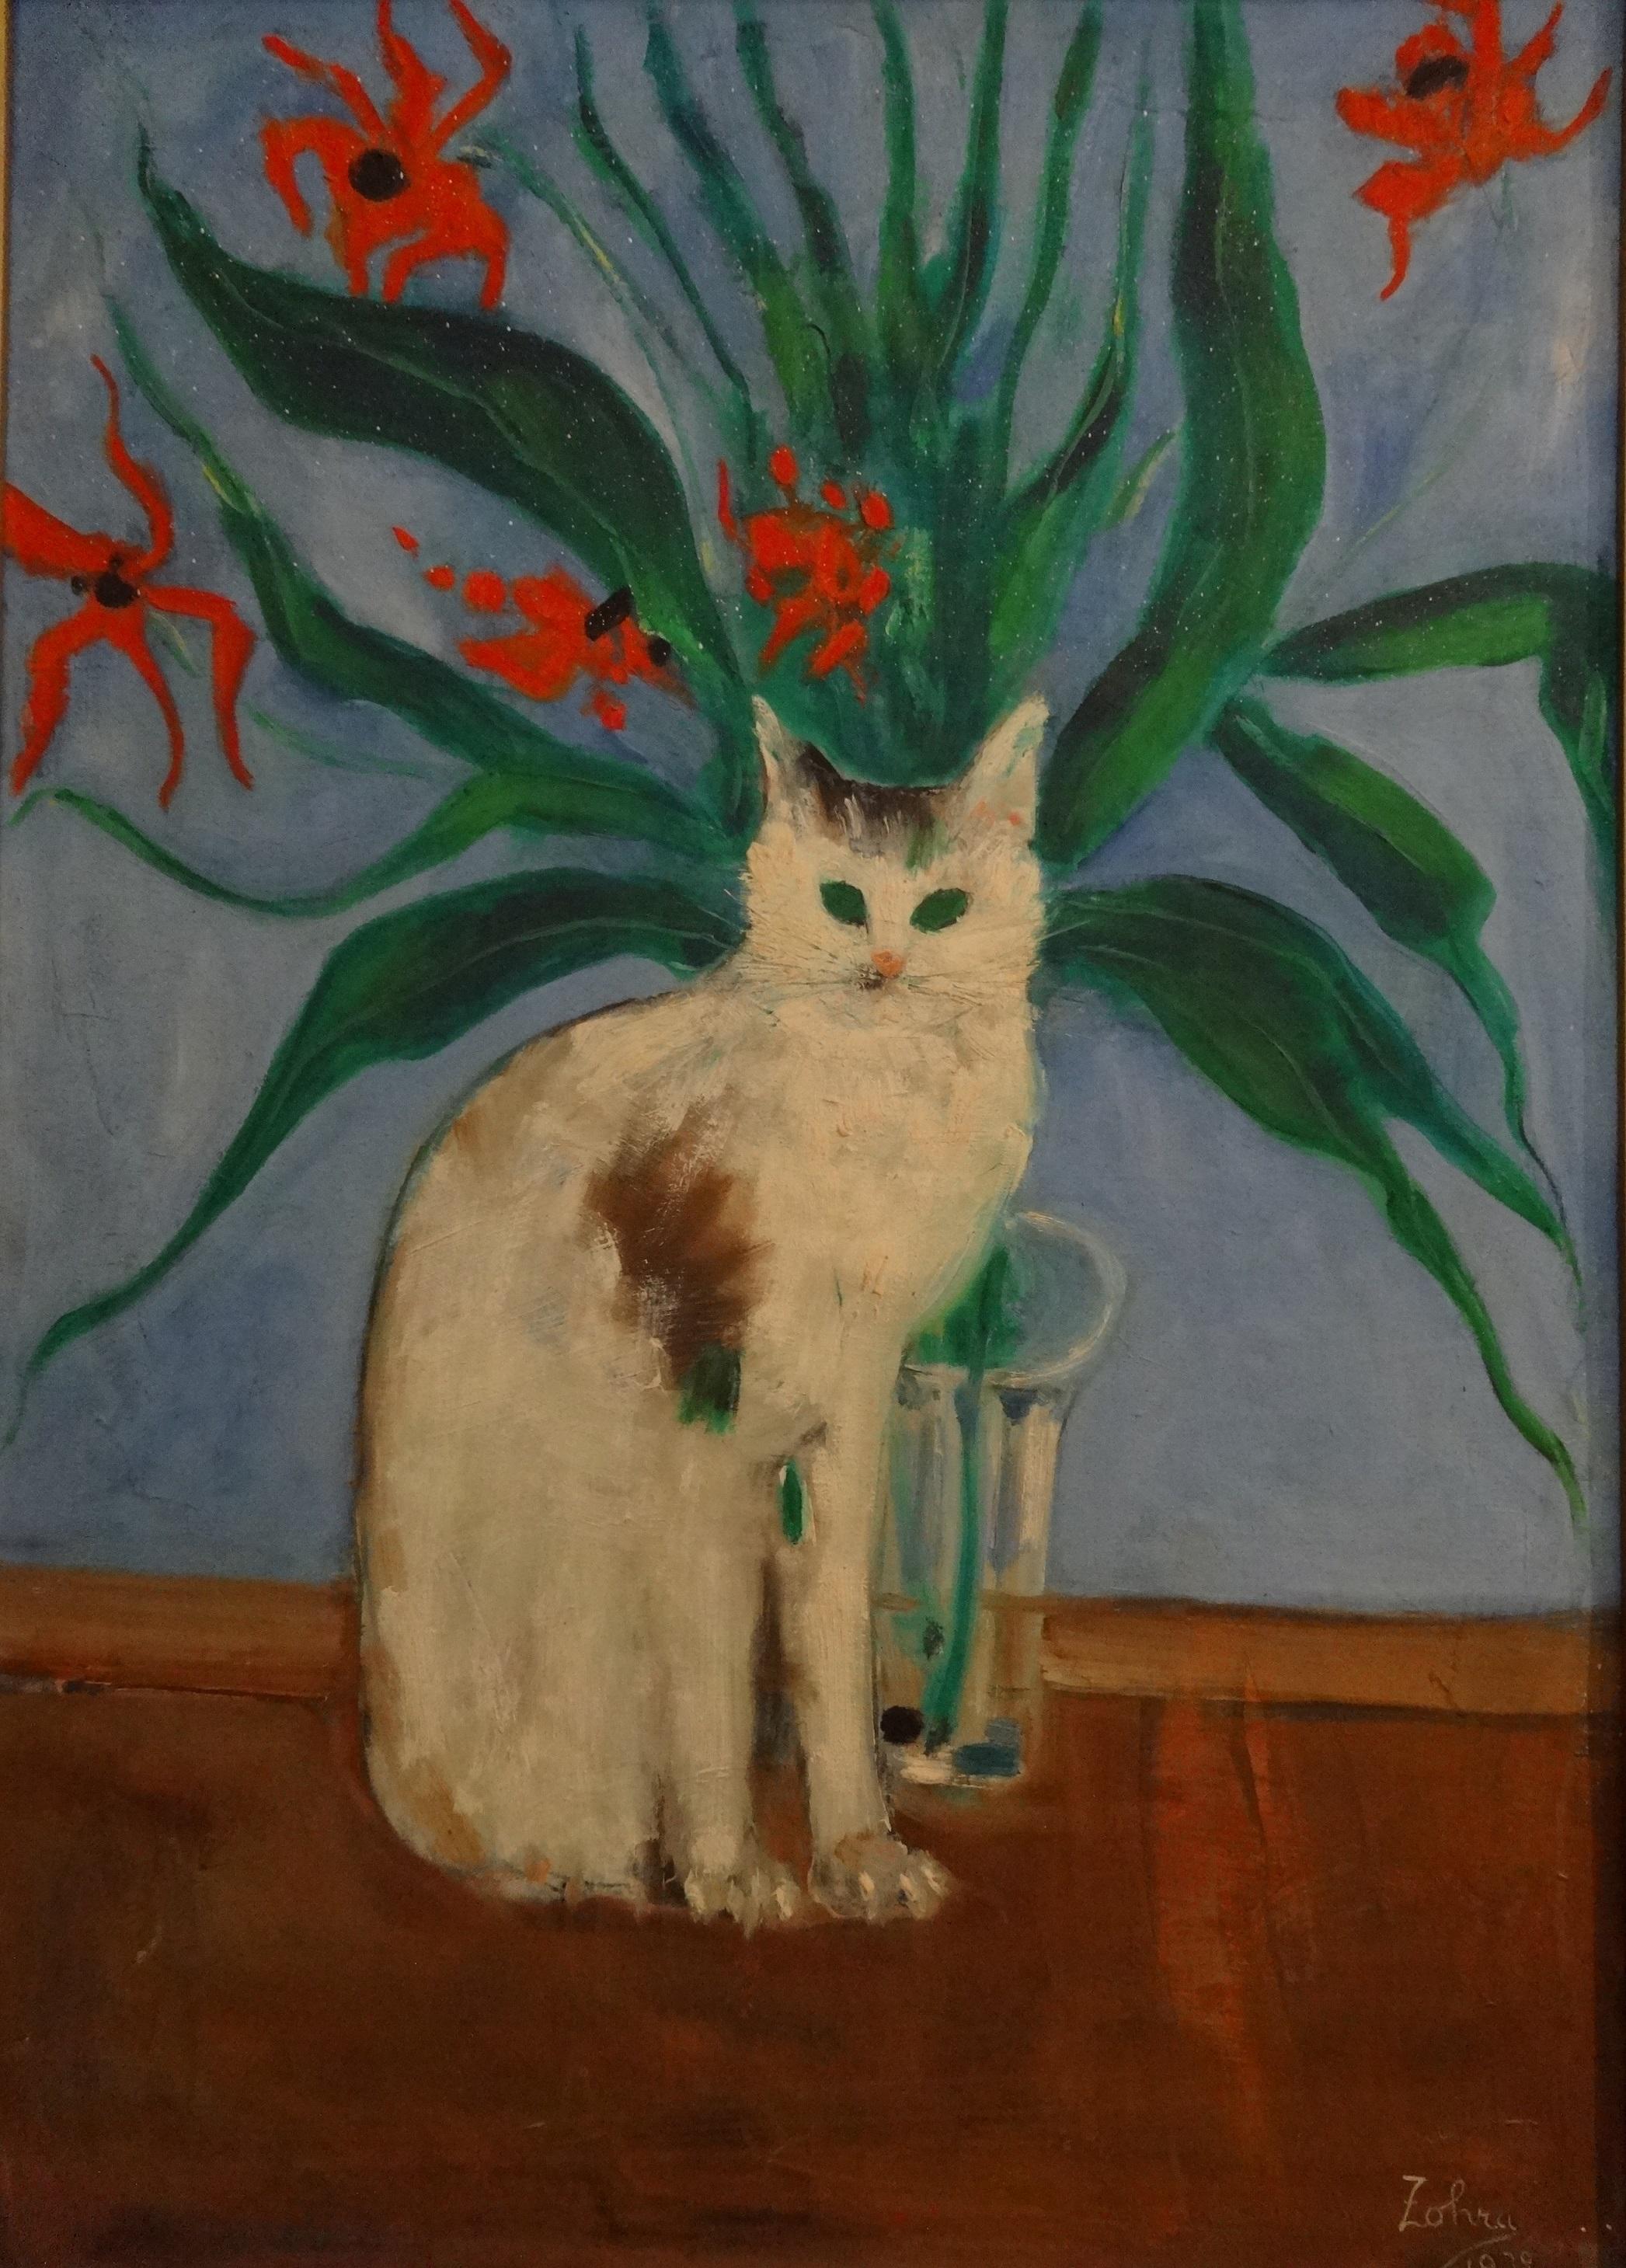 "Cat" Oil Painting 28" x 20" inch by Zohra Efflatoun

Zohra Efflatoun came from an artistic family. Her half-sister Inji was a renowned painter from Cairo. Whereas Zohra, who lived in Alexandria, studied under the patronage of the Alexandrian